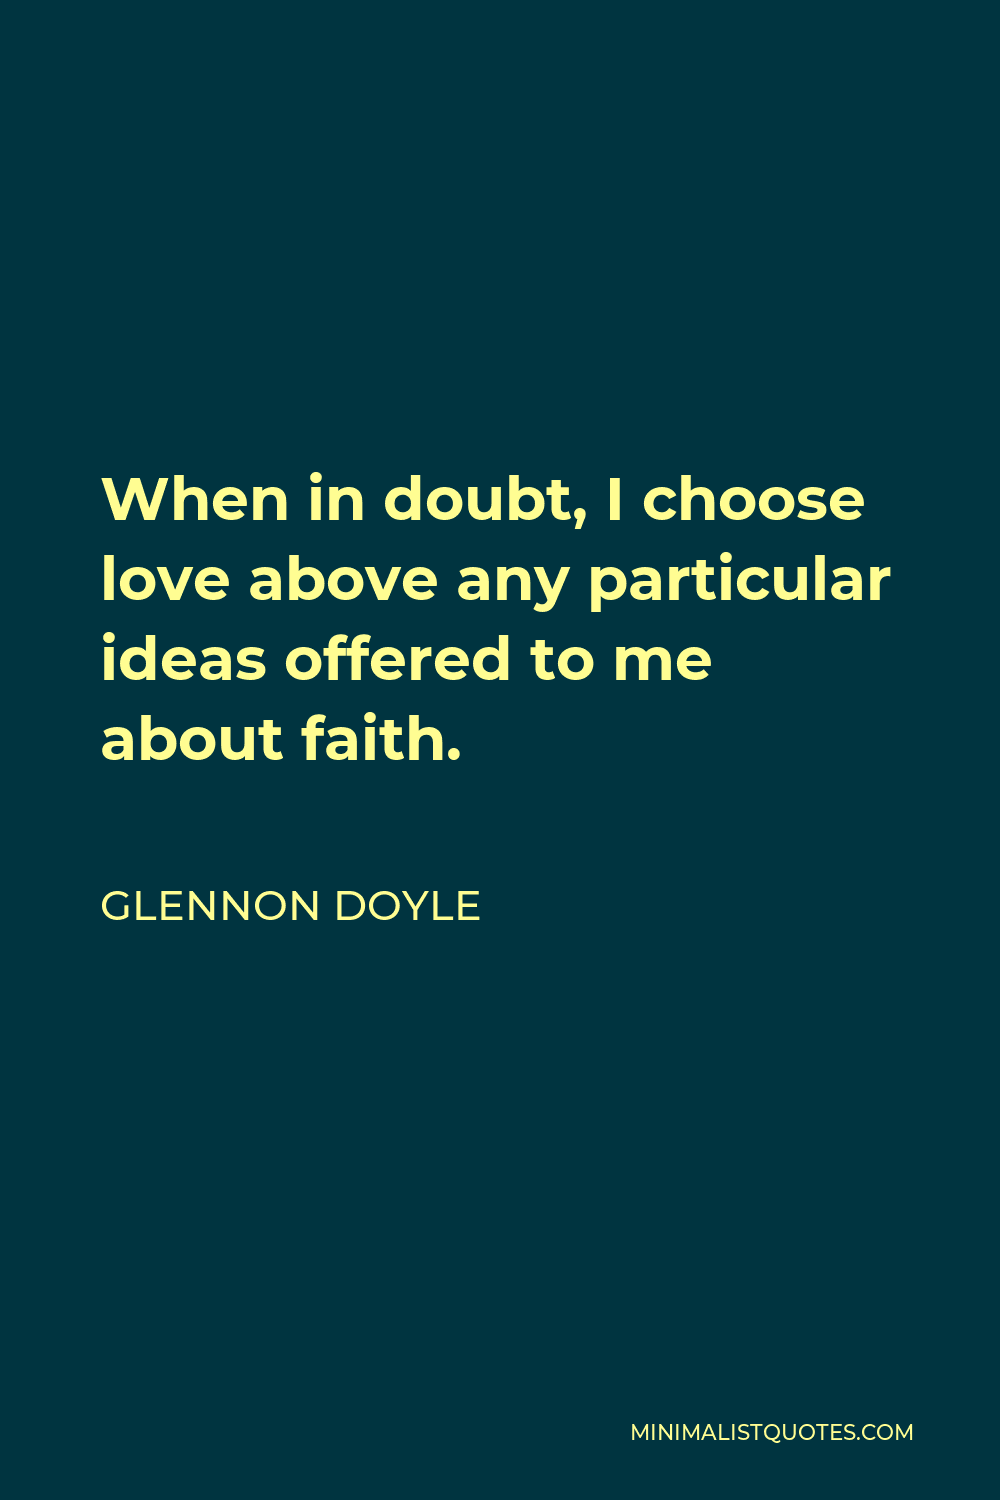 Glennon Doyle Quote - When in doubt, I choose love above any particular ideas offered to me about faith.